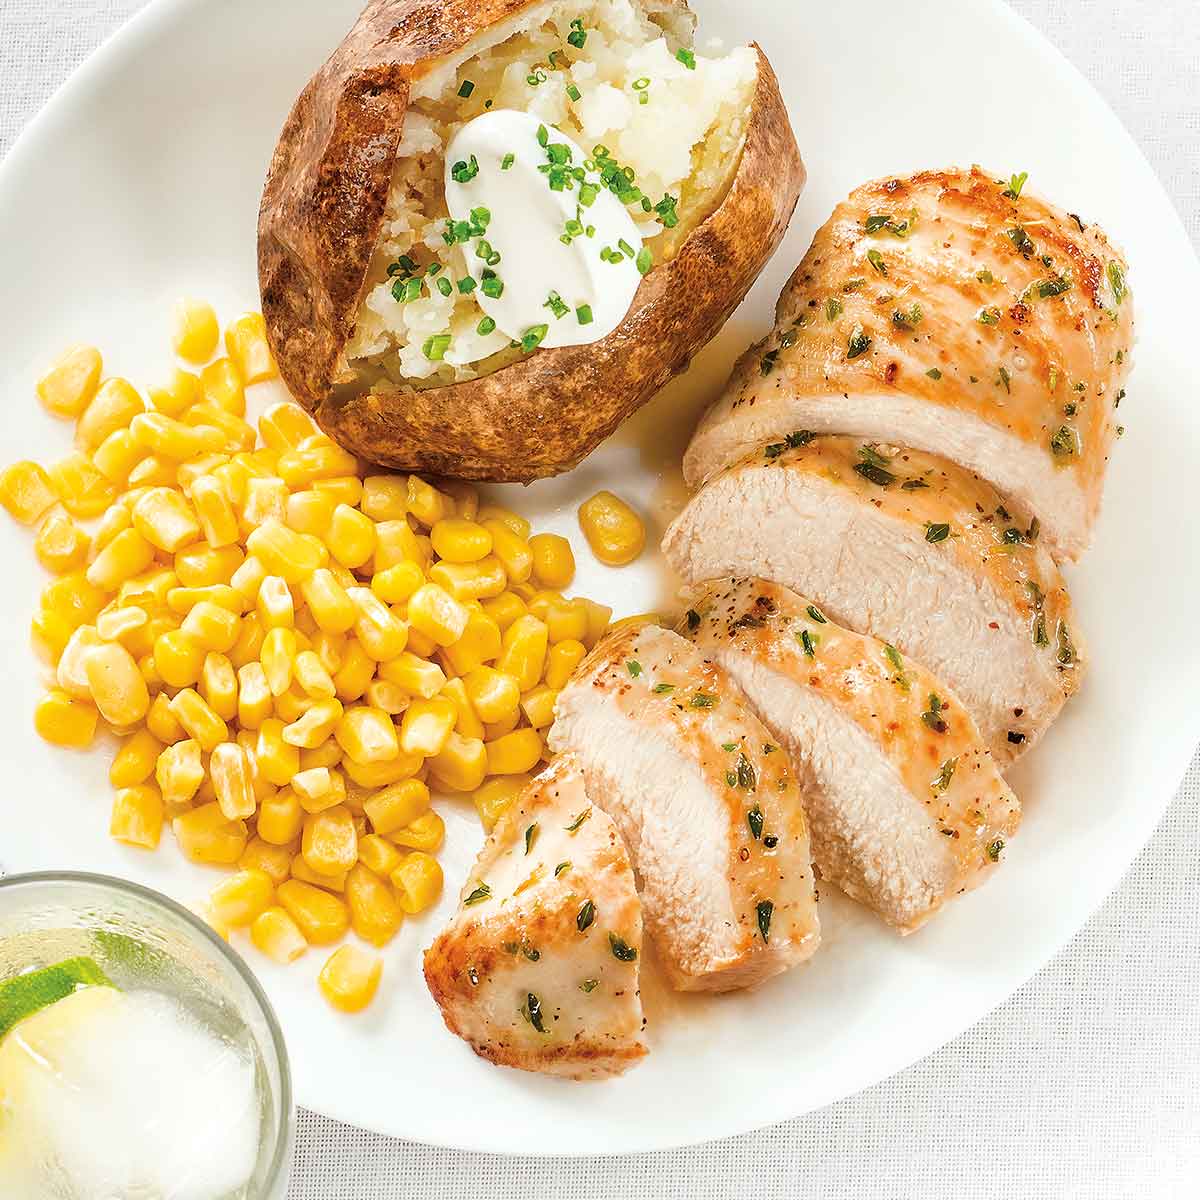 Pan Seared Chicken, Baked Potato and Steamed Corn with Wonder Water